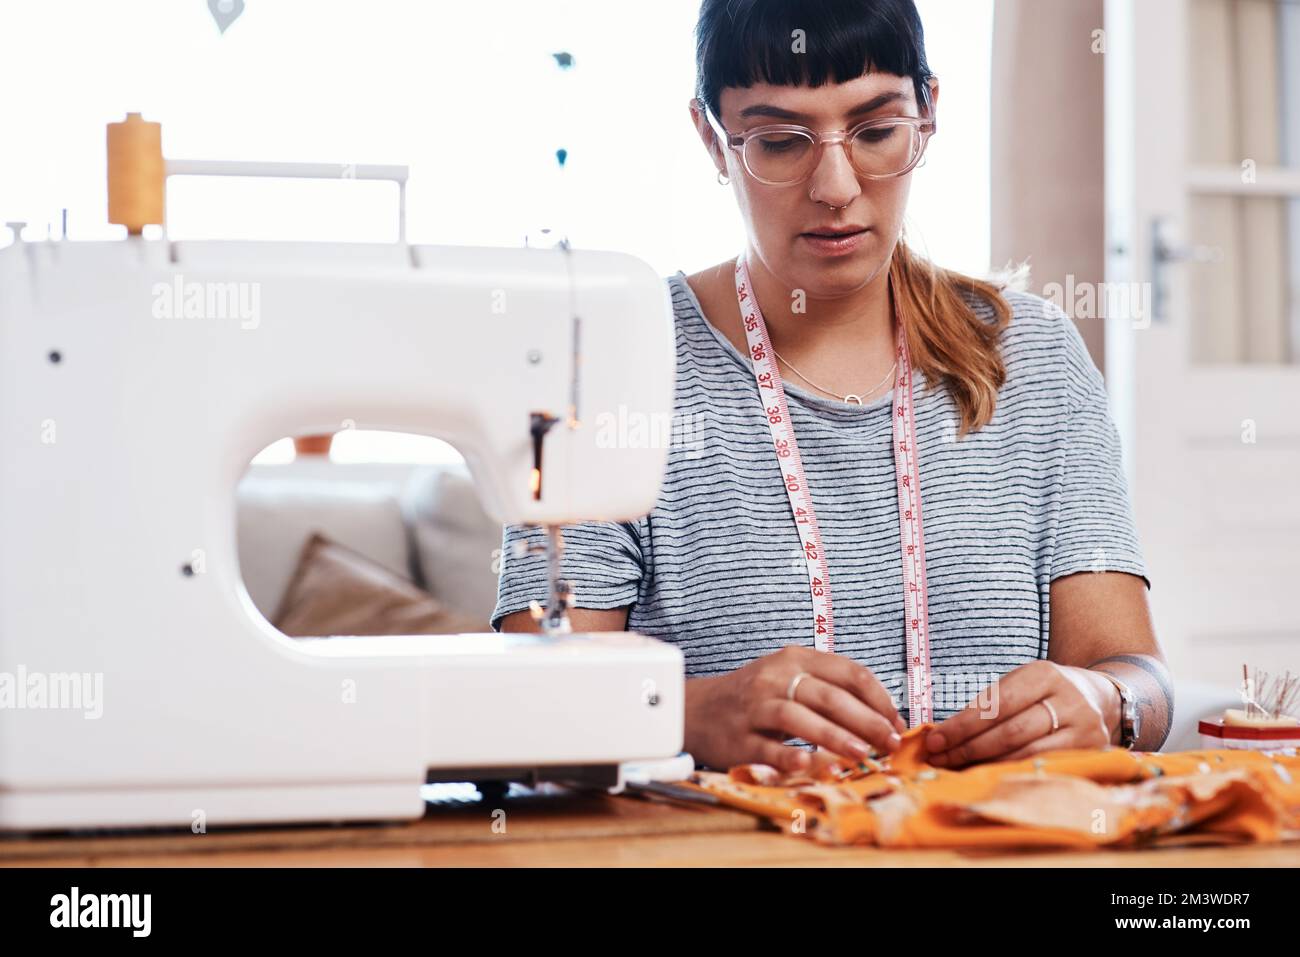 Focused on perfect every detail. a young woman designing a garment at home. Stock Photo